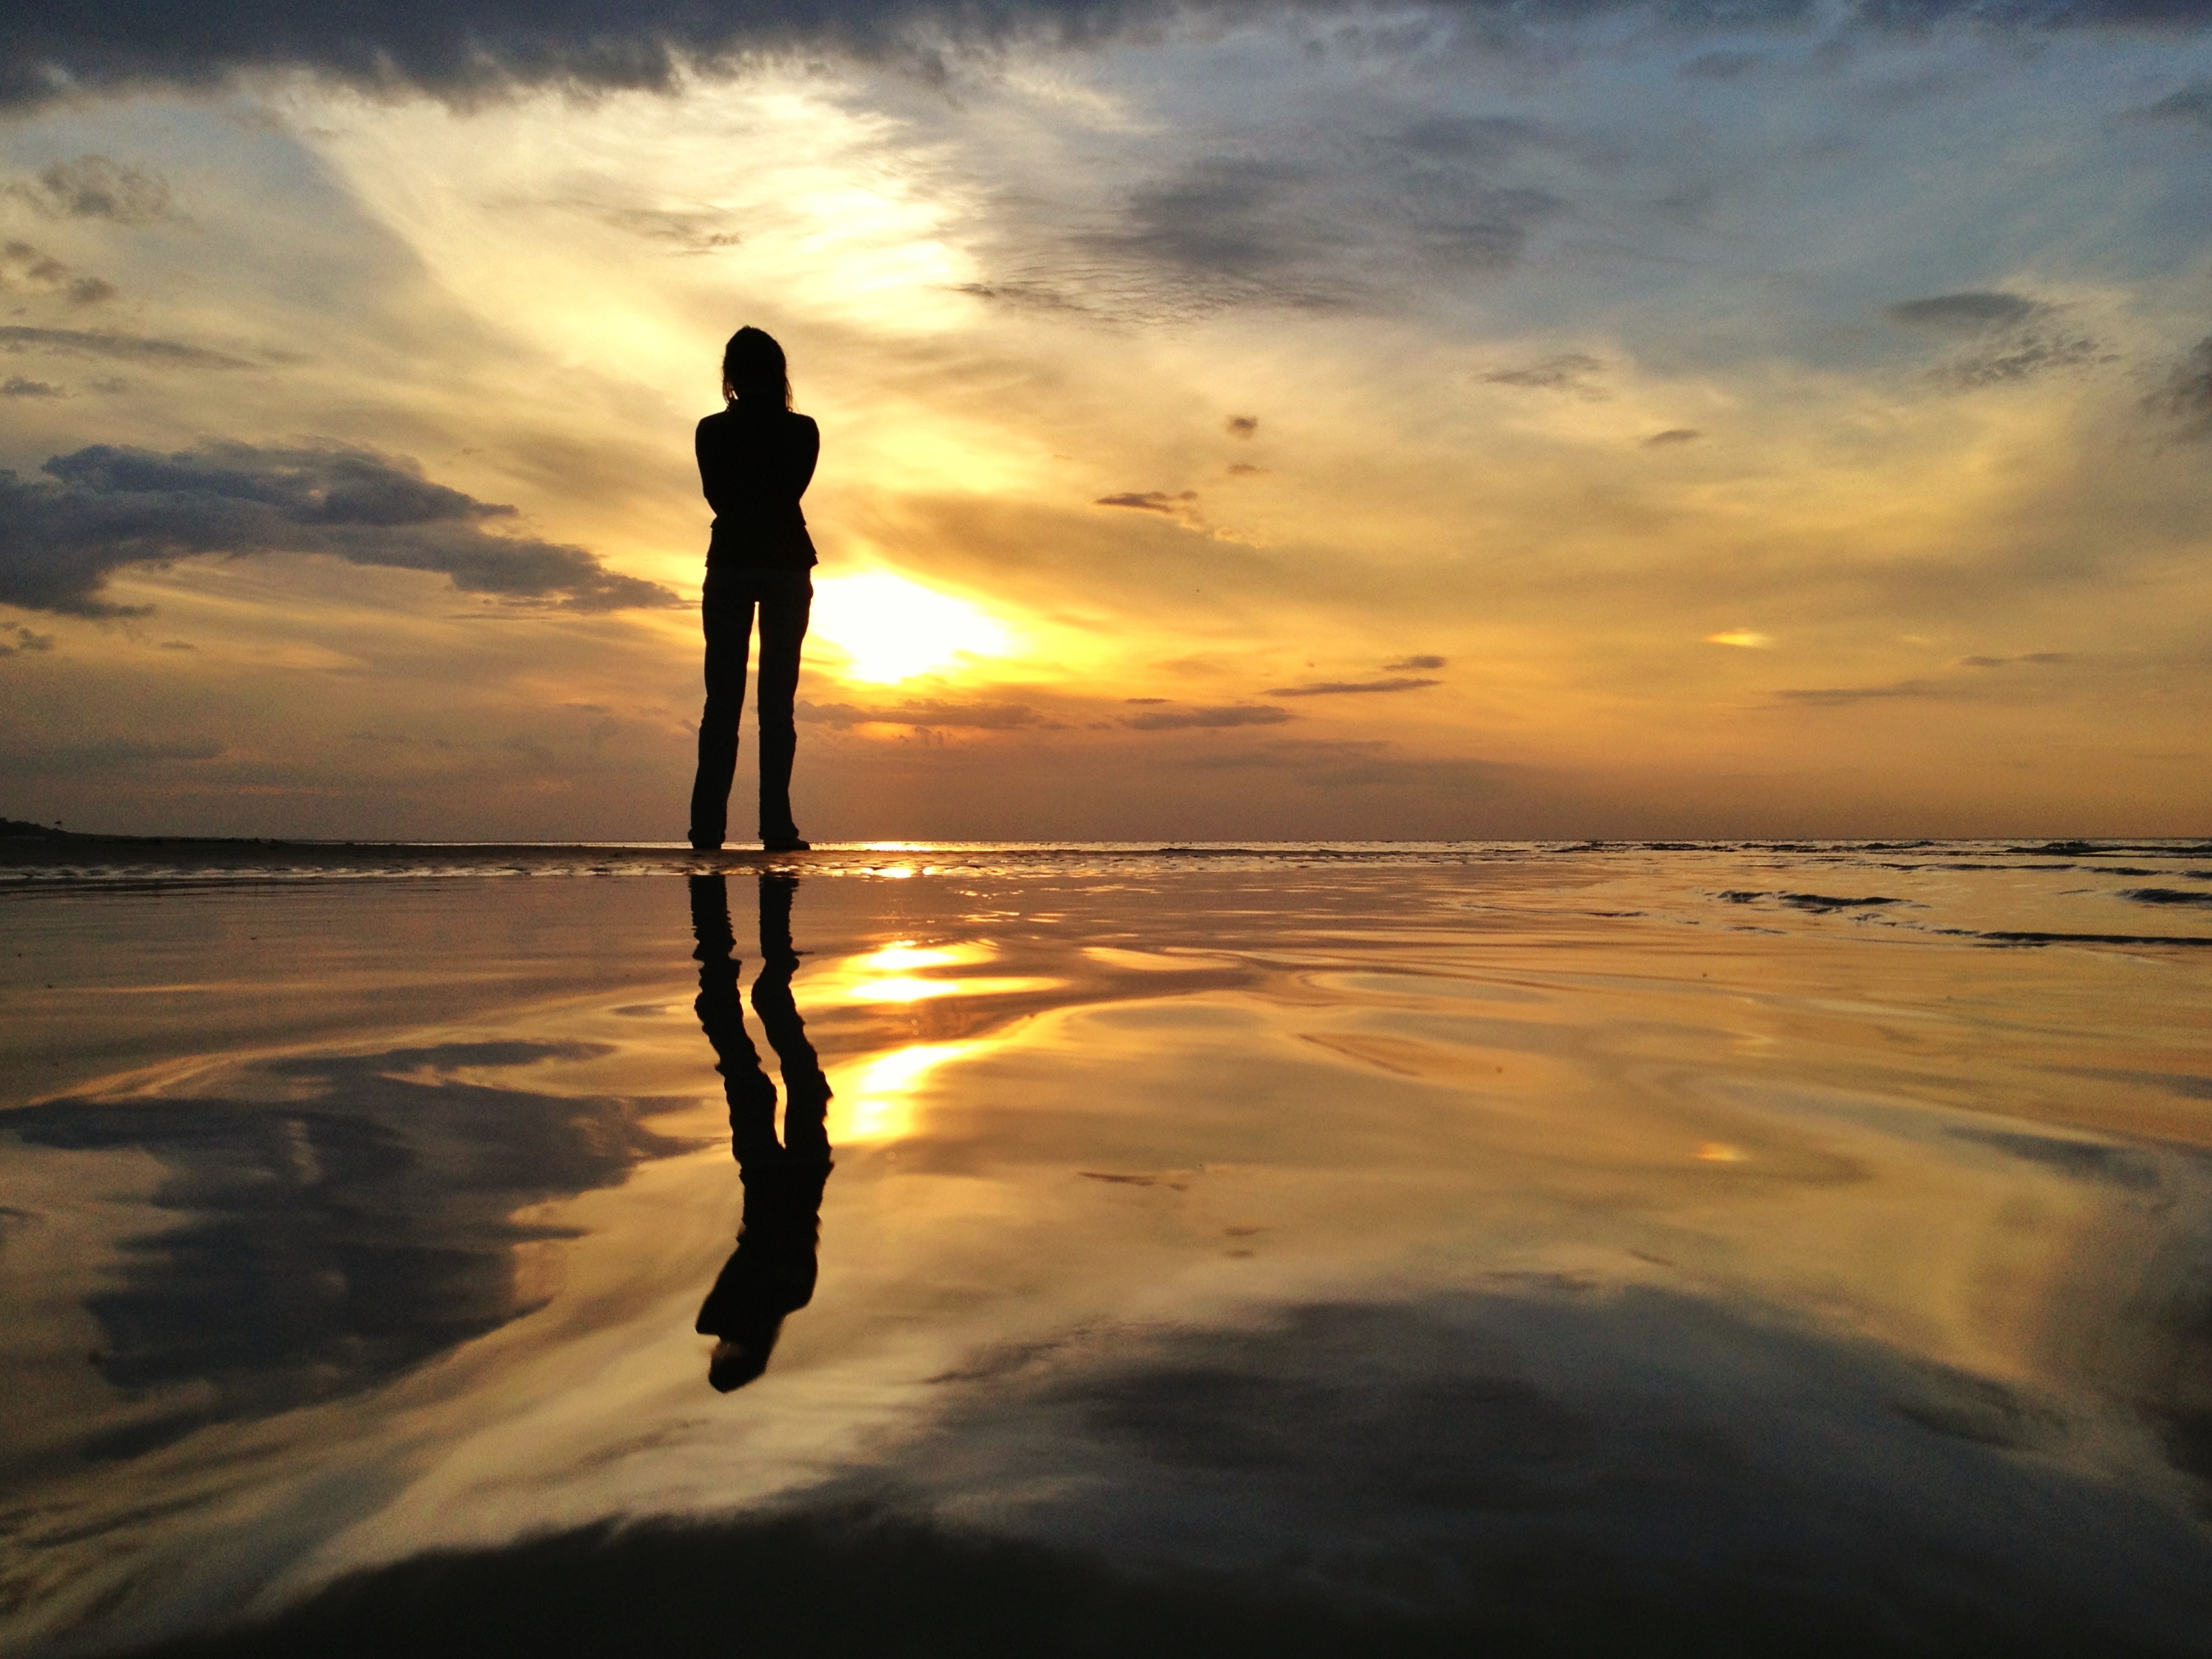 10 Tips for Taking Stunning Silhouette Photos with Your Smartphone